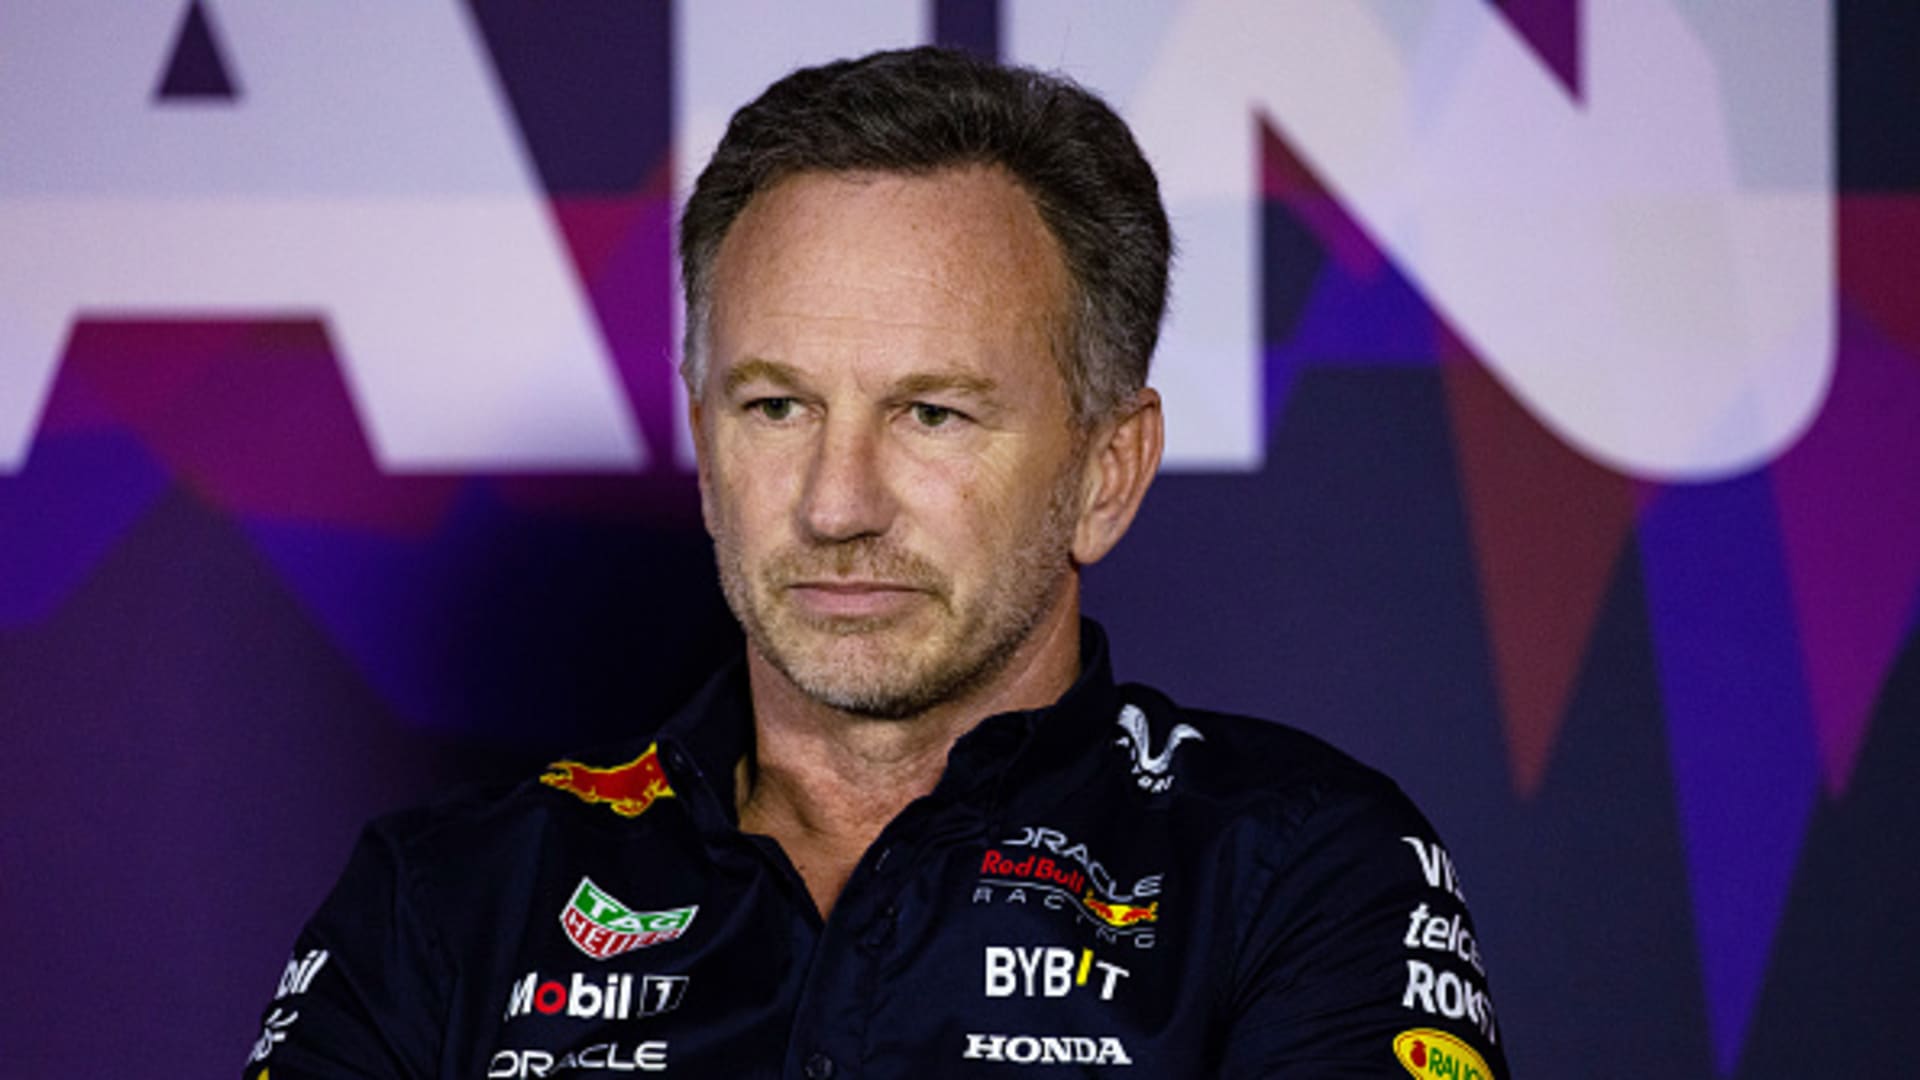 Christian Horner: Red Bull team principal to remain in role after investigation into alleged inappropriate behaviour